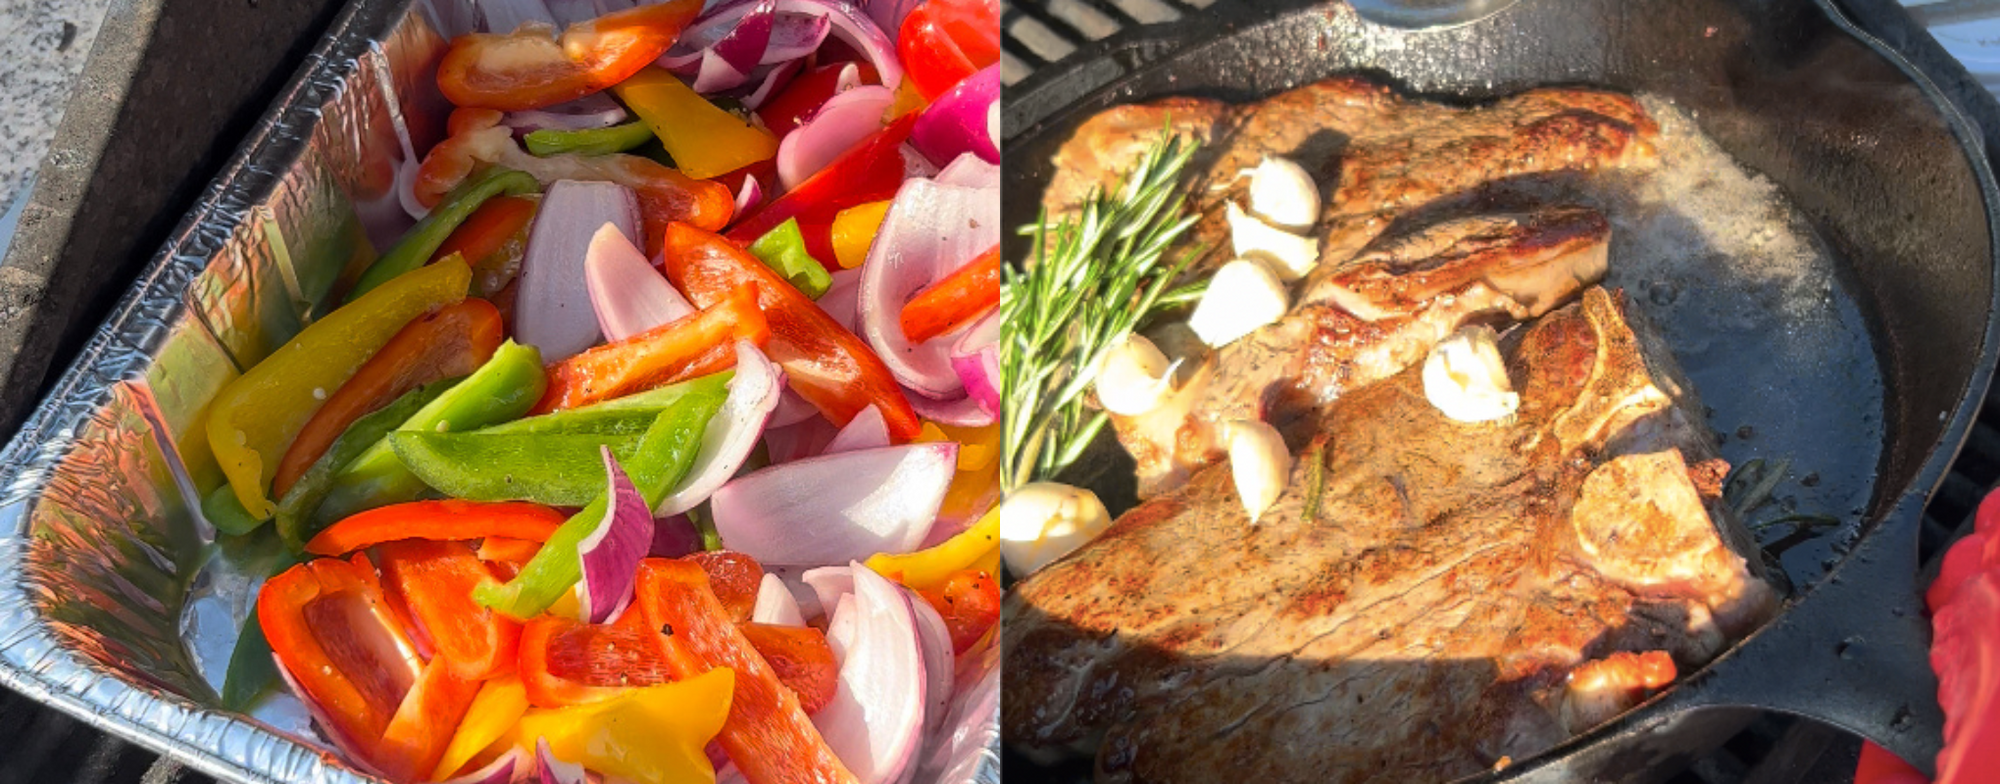 How To Grill Steak & Veggies with Coconut Oil for Labor Day